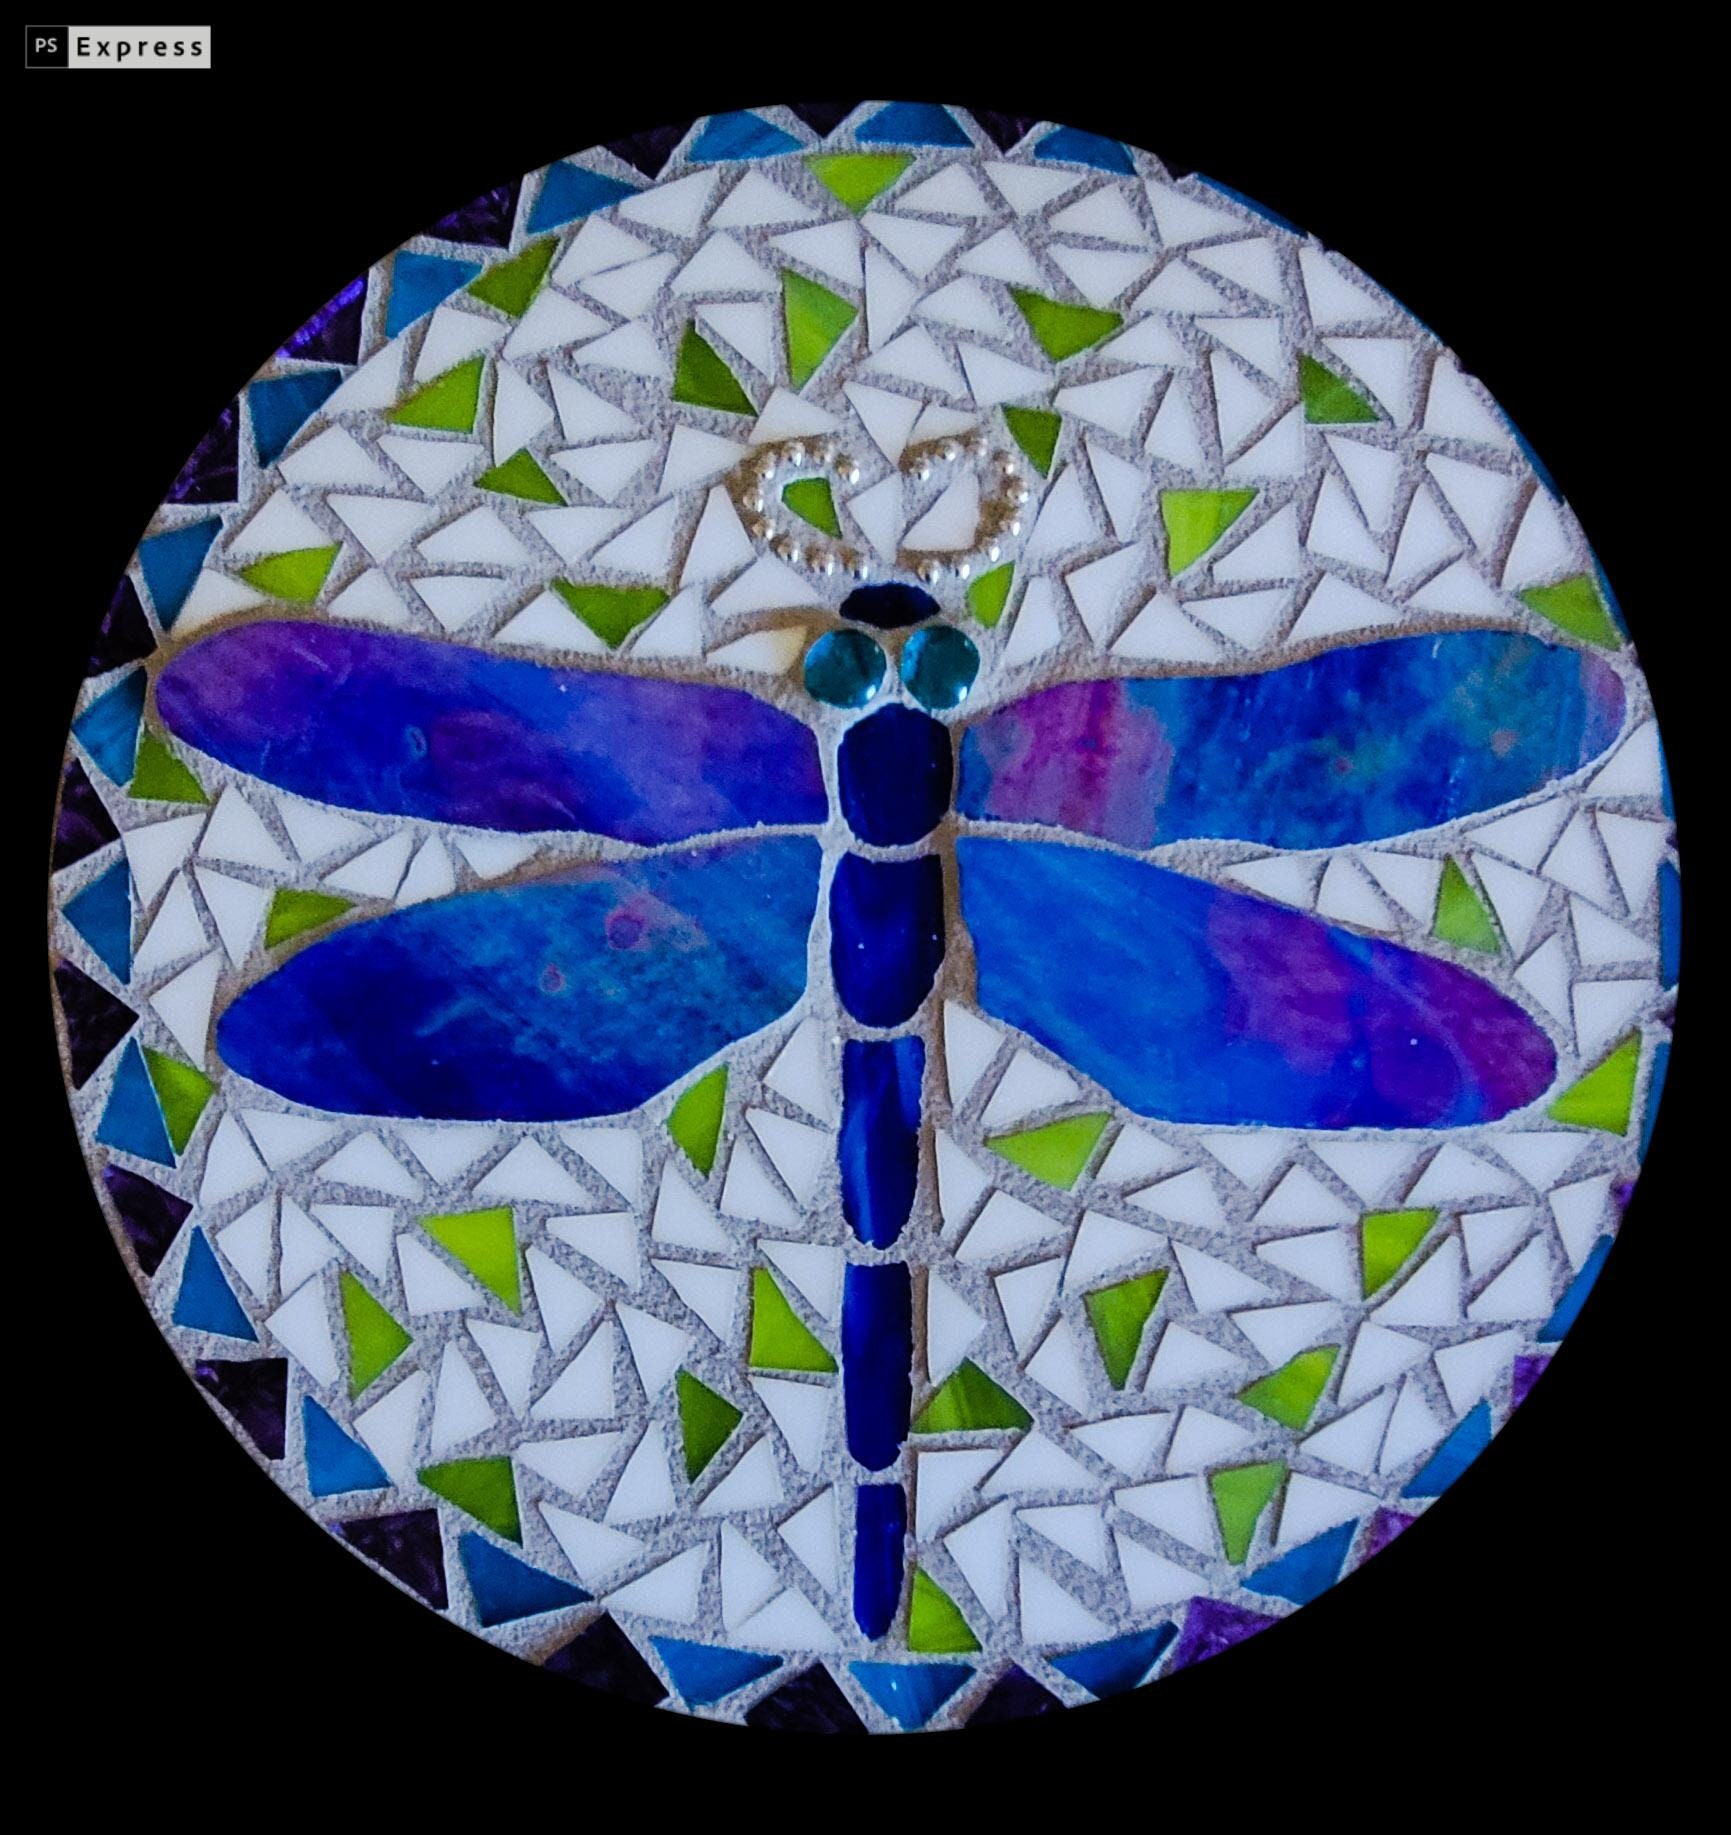 Mirrored mosaic/wood Teal Dragonfly wall art plaque decoration L36cm x W45cm-NEW 